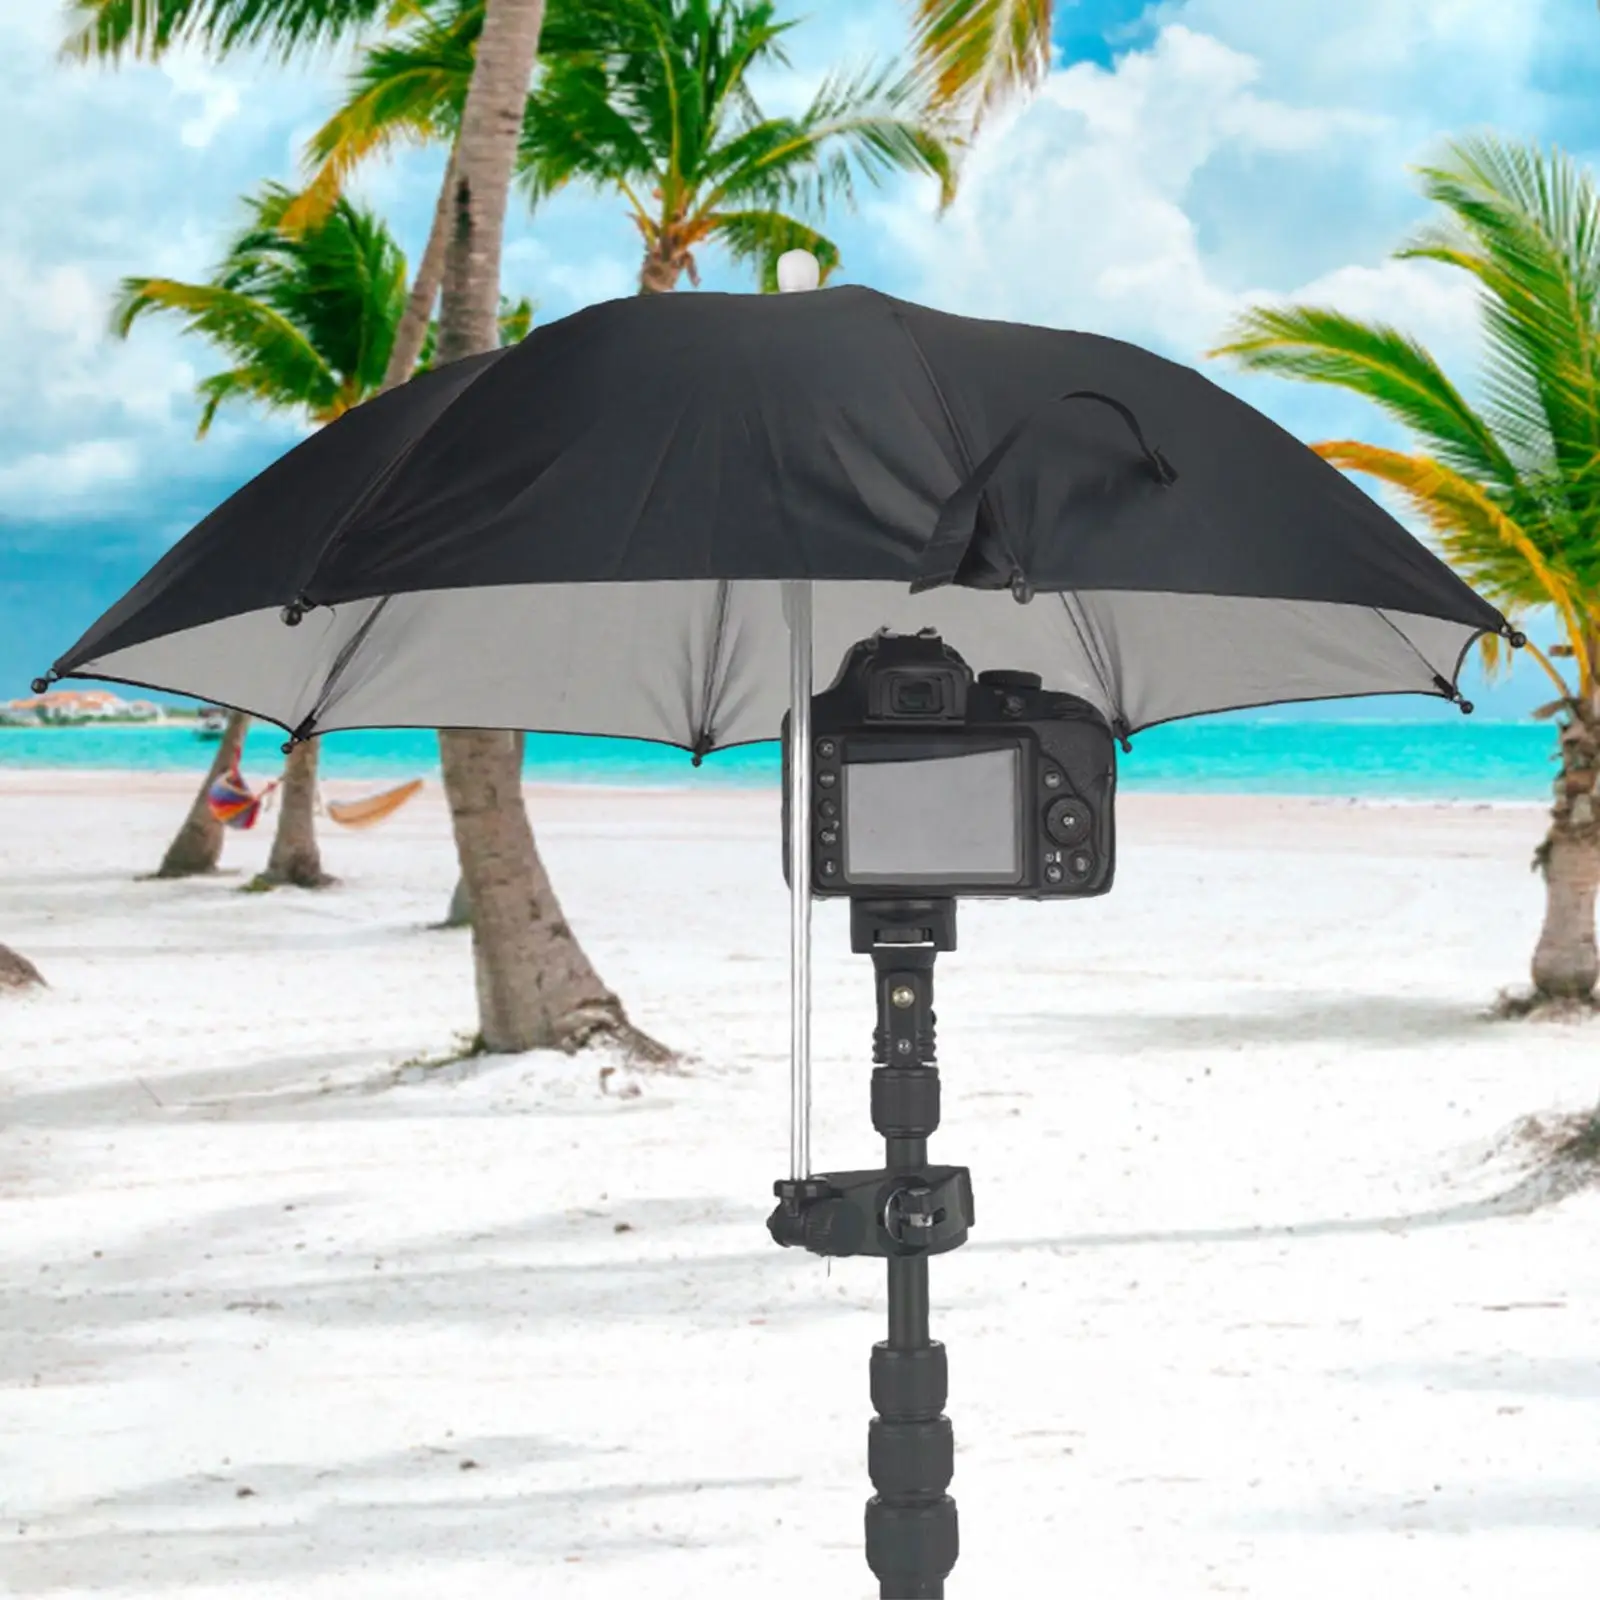 Adjustable Camera Umbrella with Clip Accs Compact Bracket Professional Sunshade for Photography Phone Studio